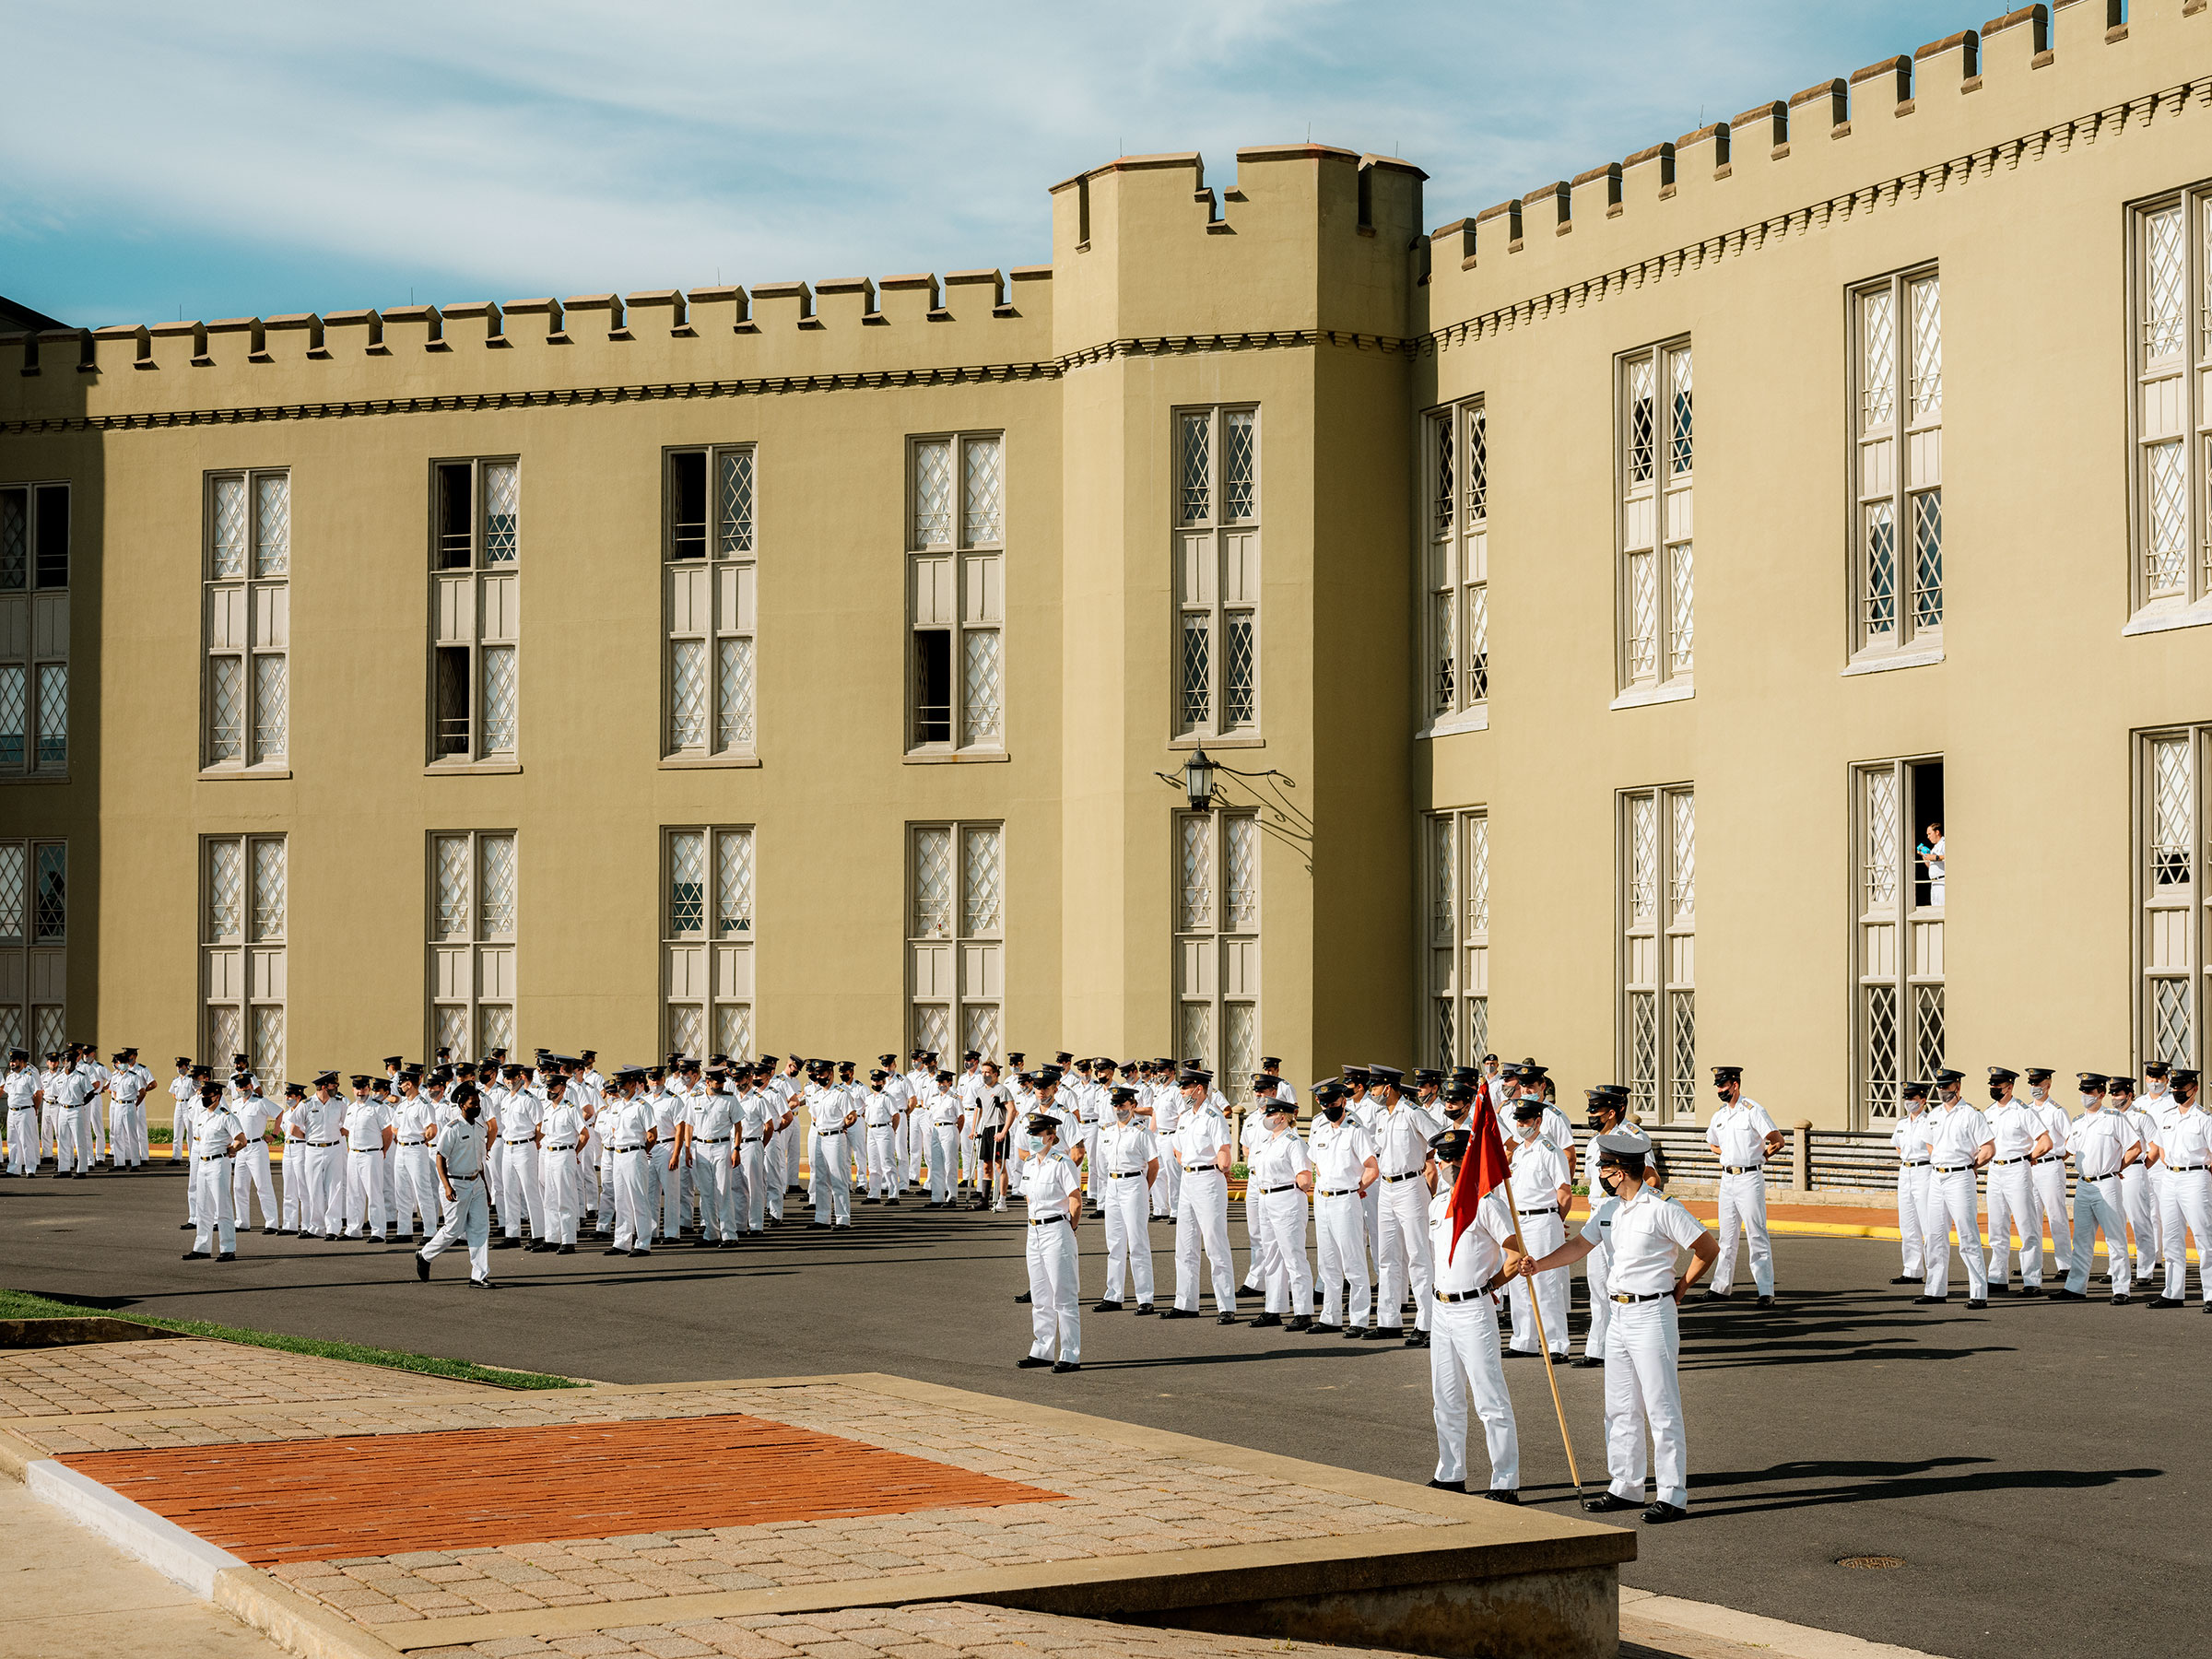 Cadets gather outside the barracks, near the area where Stonewall Jackson's statue once stood. (Jared Soares for TIME)